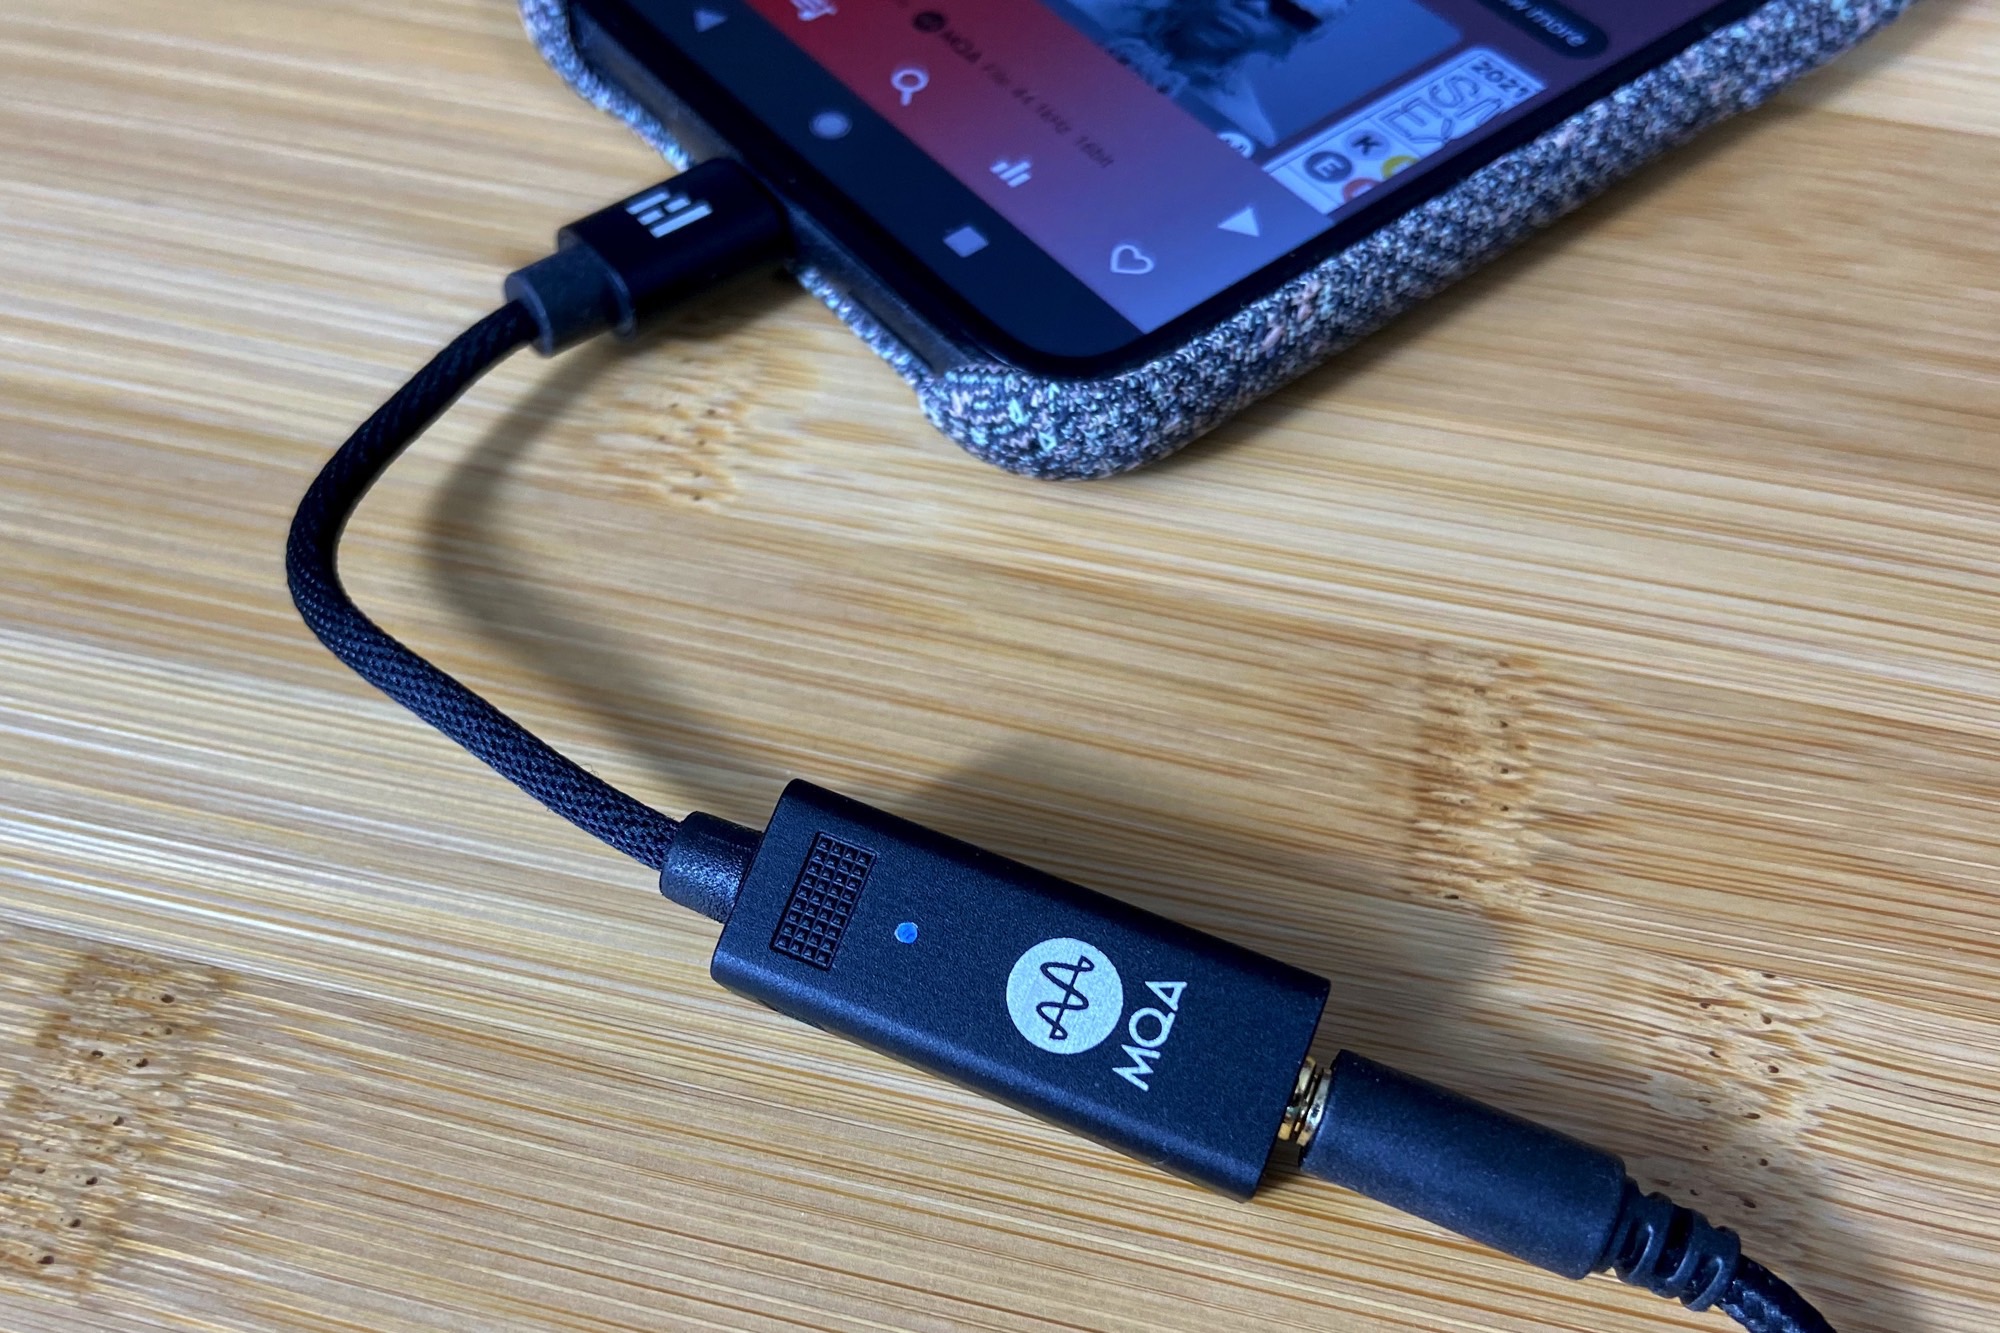 Should I buy a DAC if I only use Spotify? 